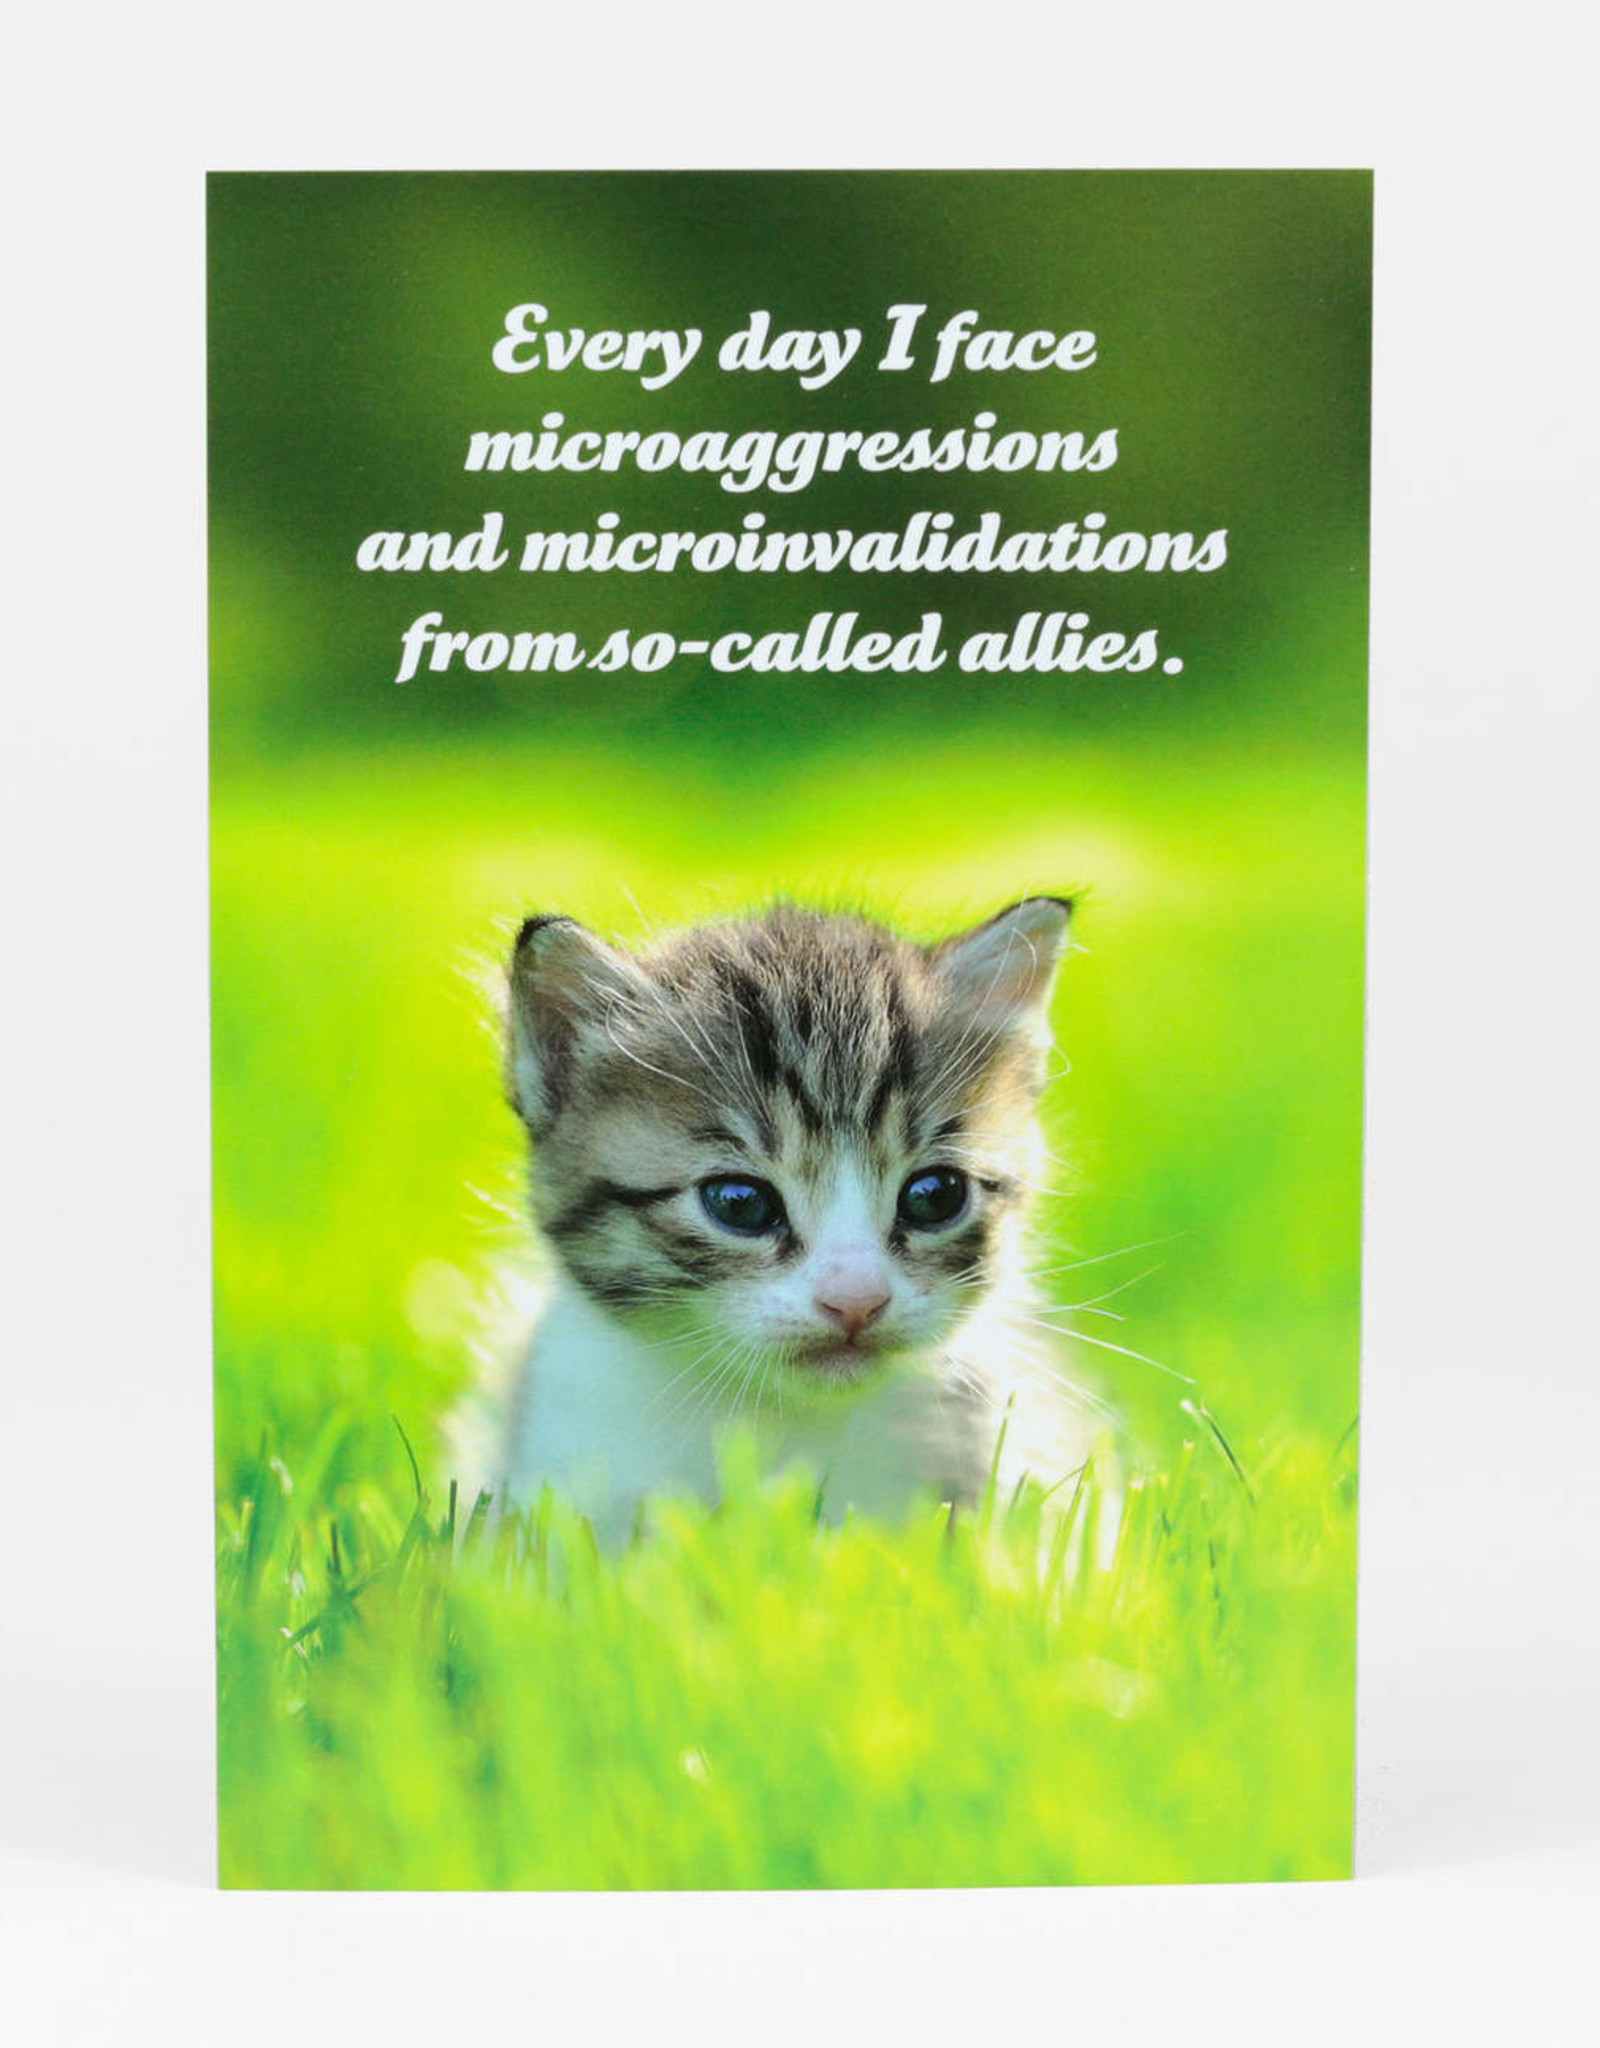 Sean Tejaratchi "Every Day I Face" Postcard - Social Justice Kittens & Puppies, by Sean Tejaratchi